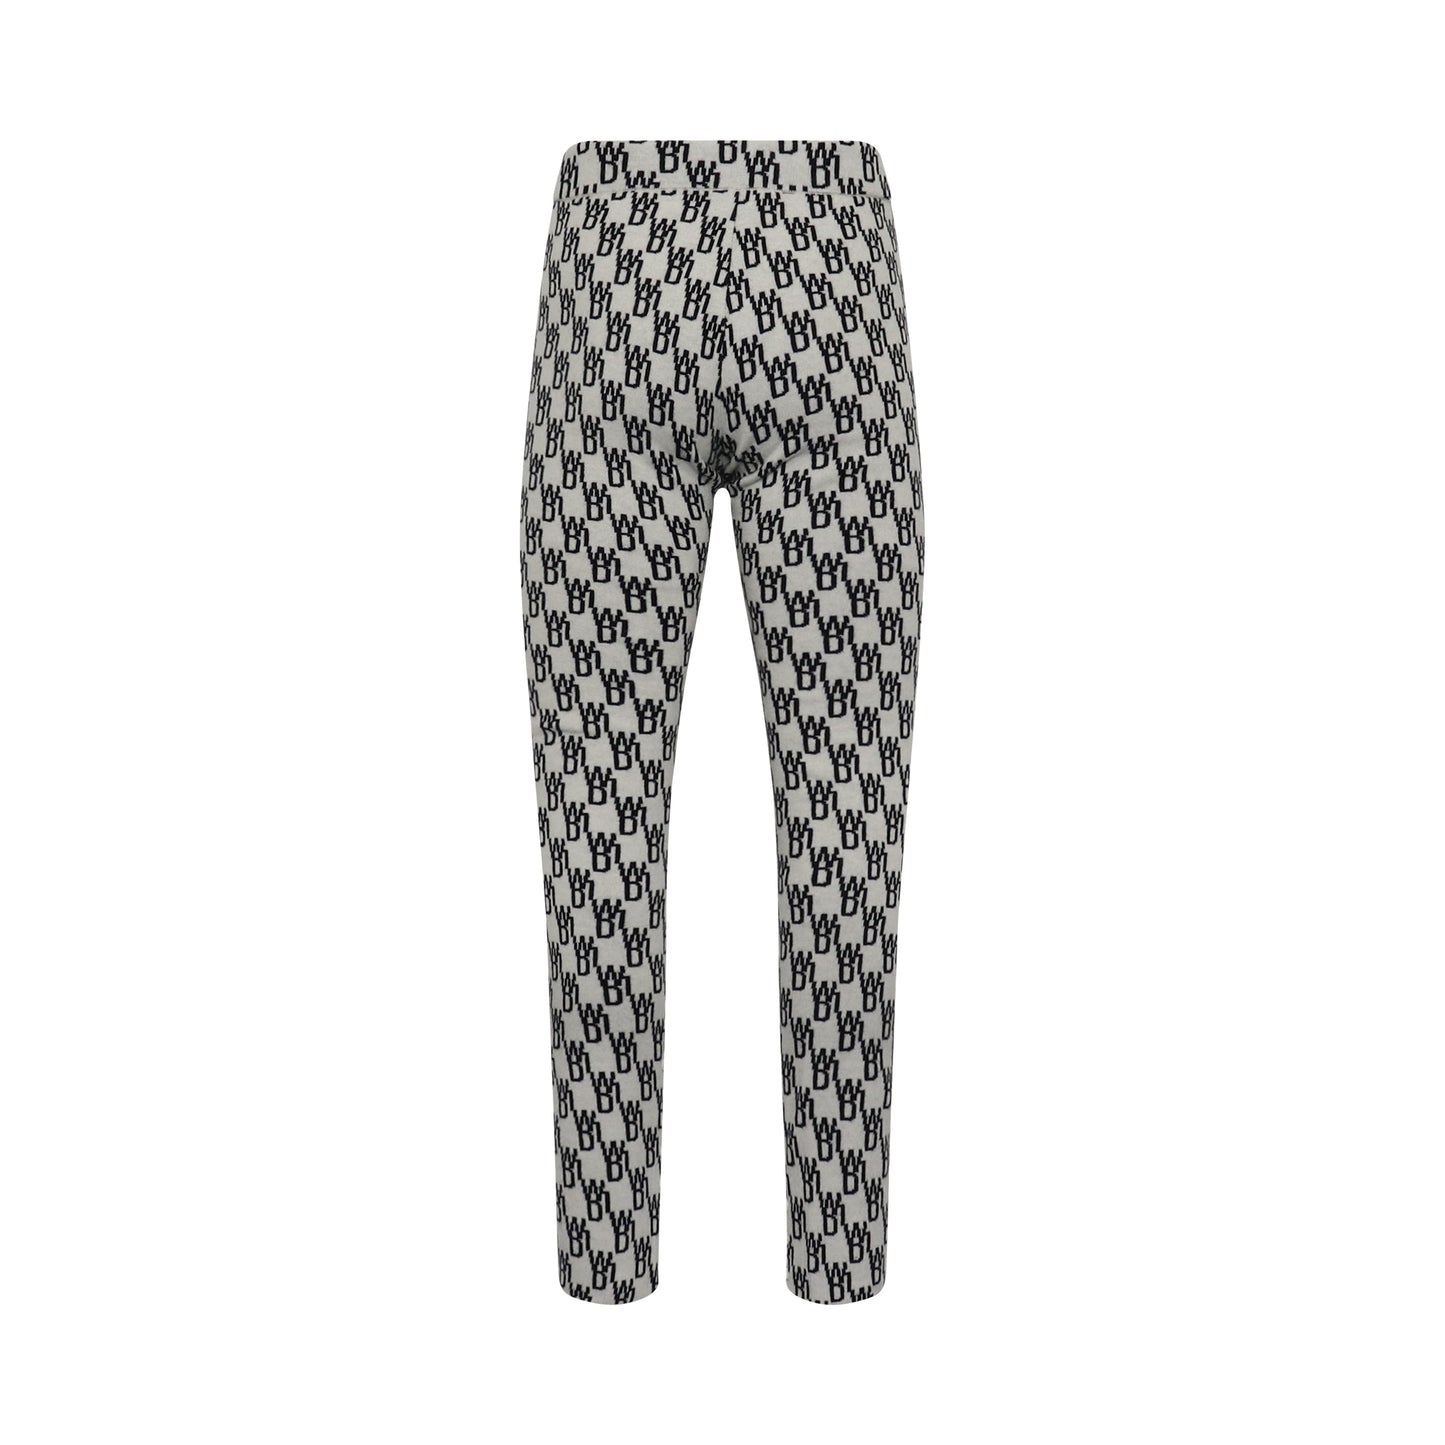 Fitted Knit Side Open Jacquard Trouser in Ivory